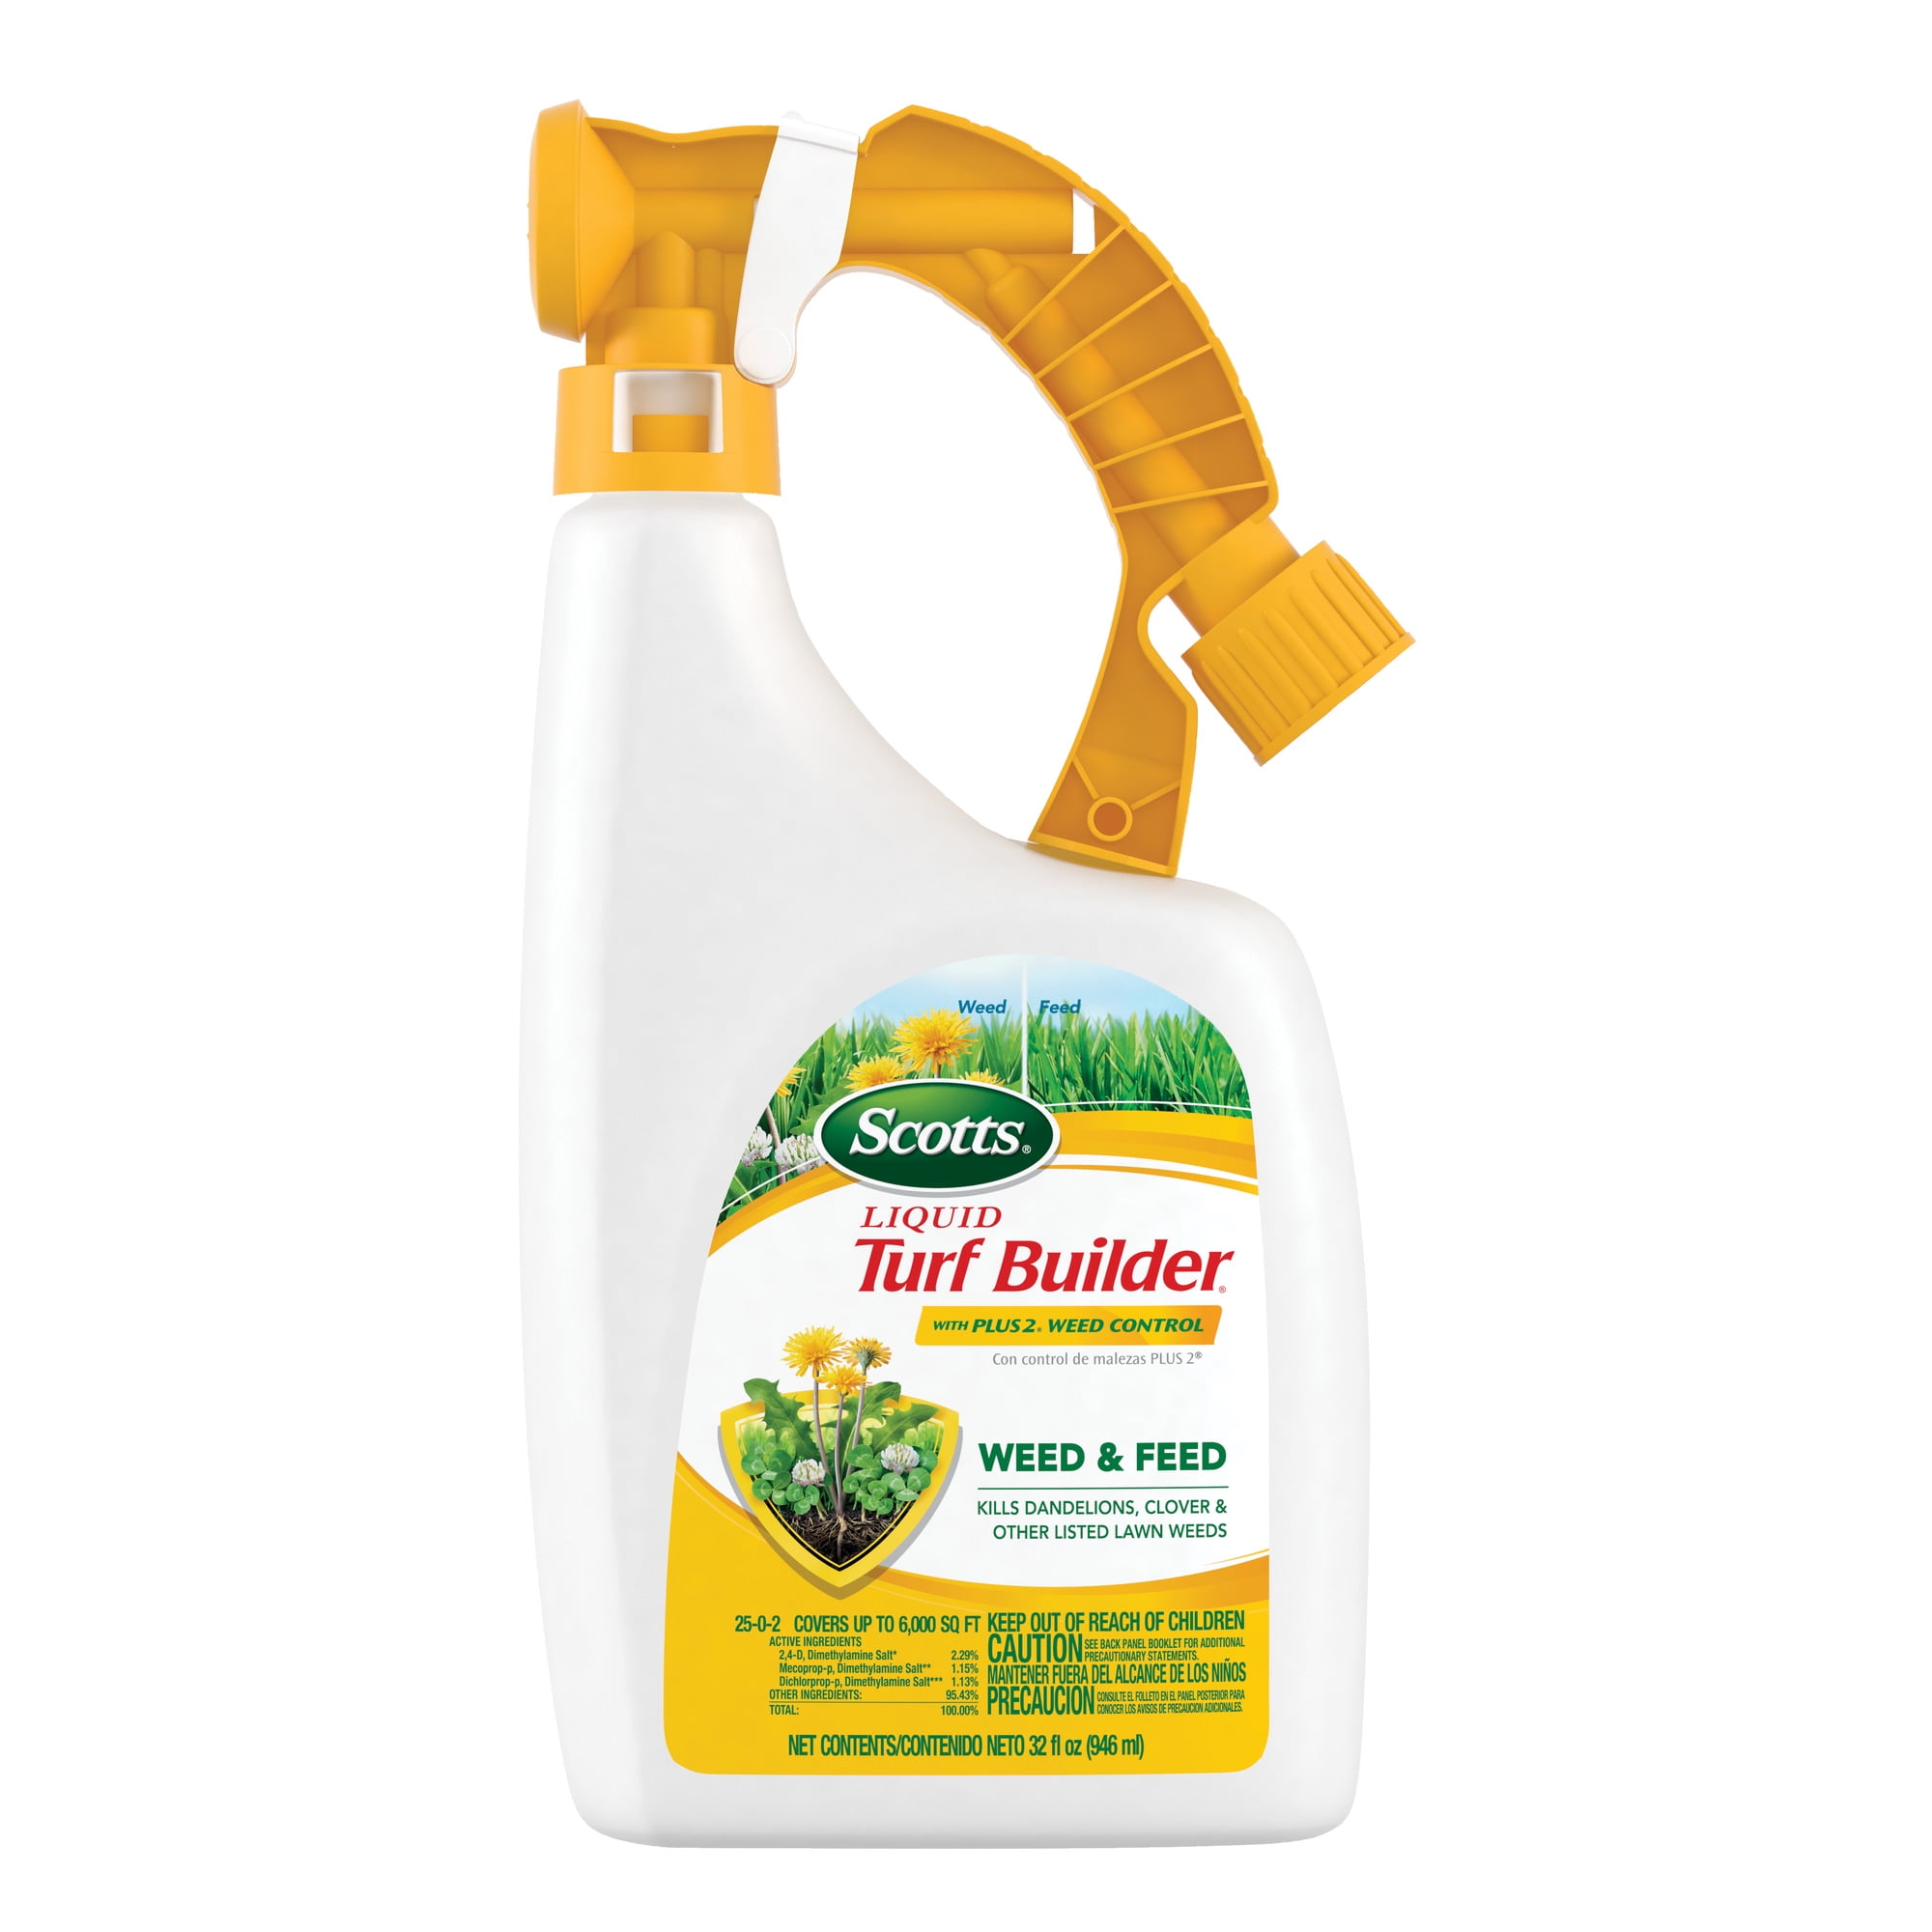 scotts-turf-builder-with-halts-crabgrass-preventer-15-000-square-feet-free-download-nude-photo